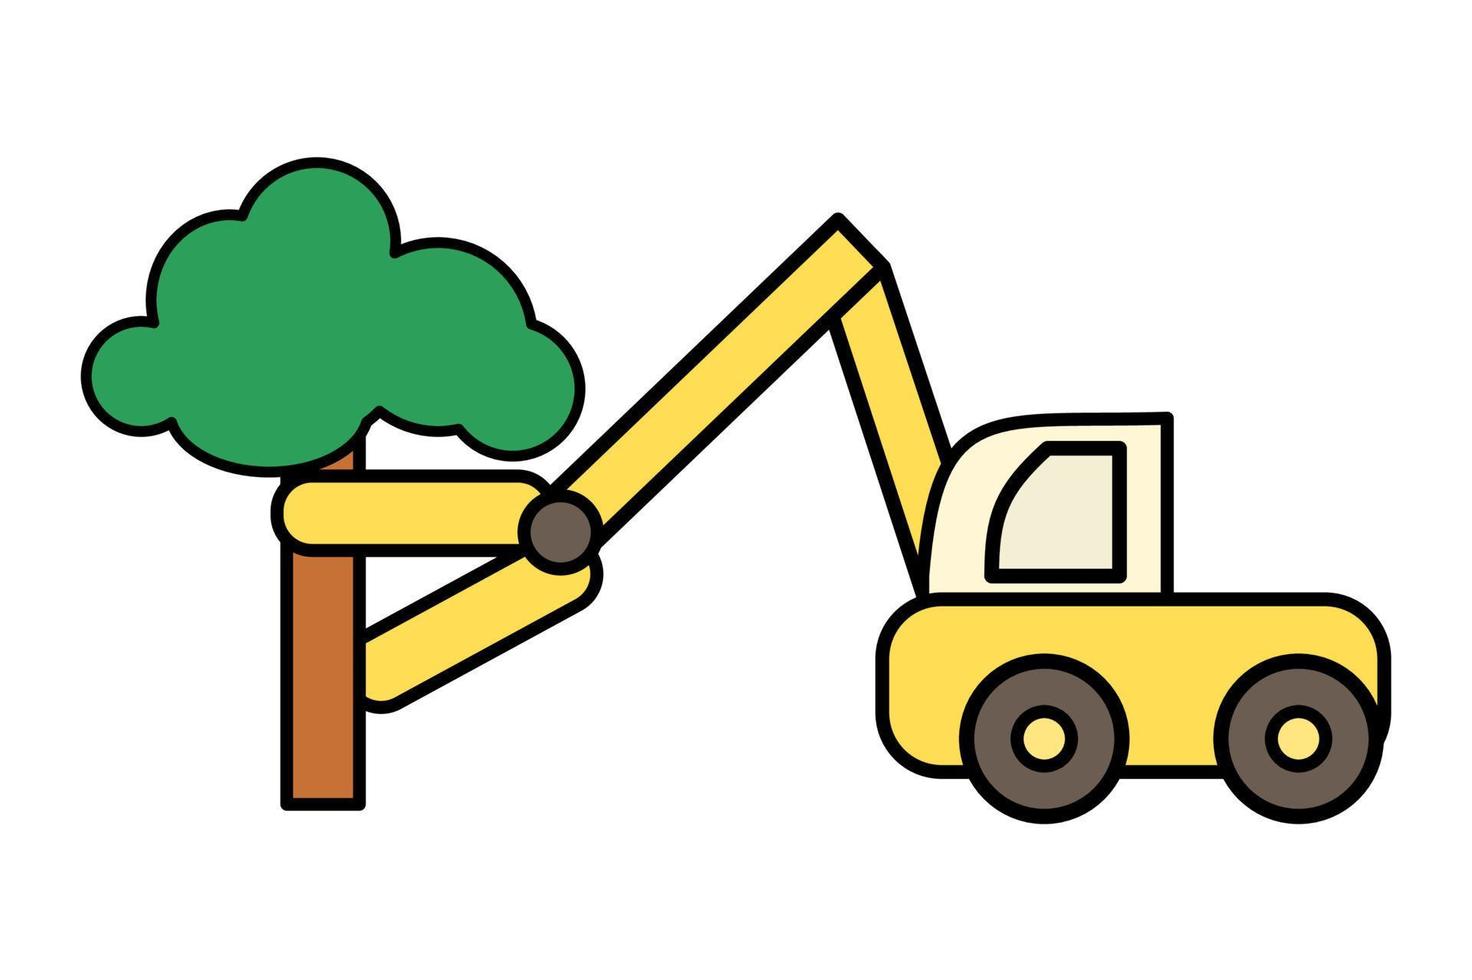 Deforestation filled icon with forest harvester machine symbol of ecosystem destruction and nature devastation can be used for presentation, web and ui. vector